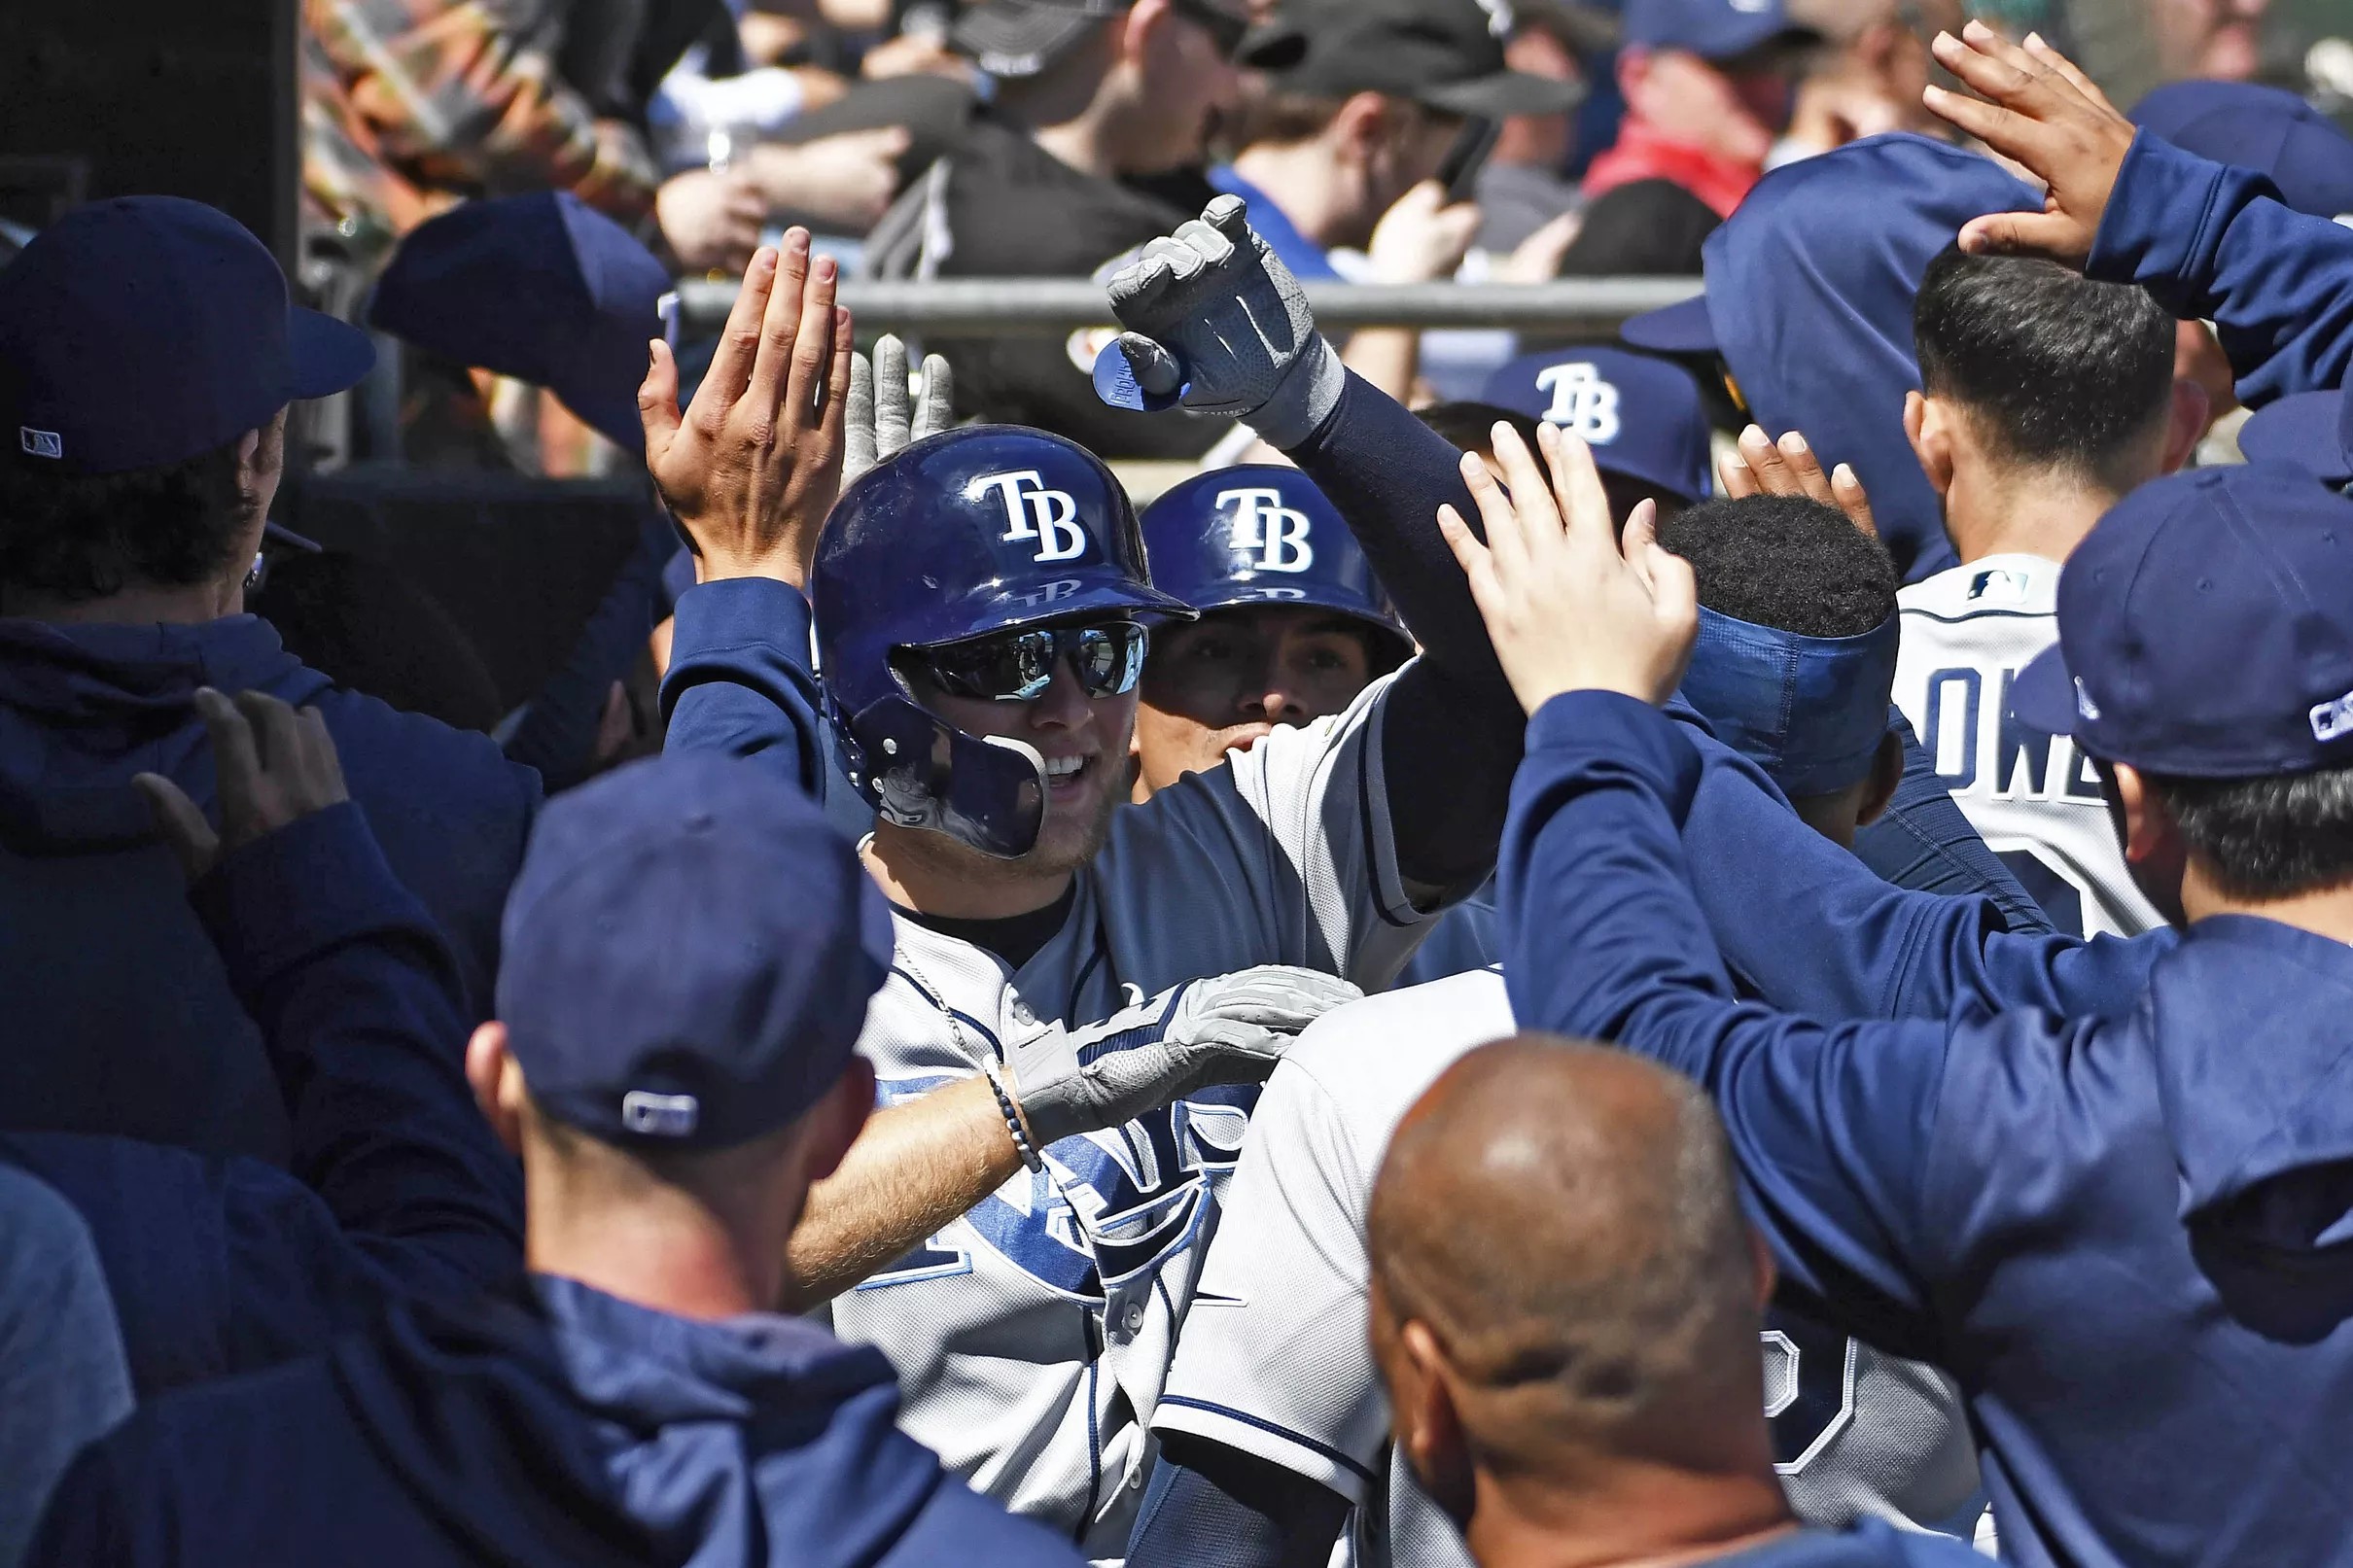 Rays 10, White Sox 5 Rays win another series